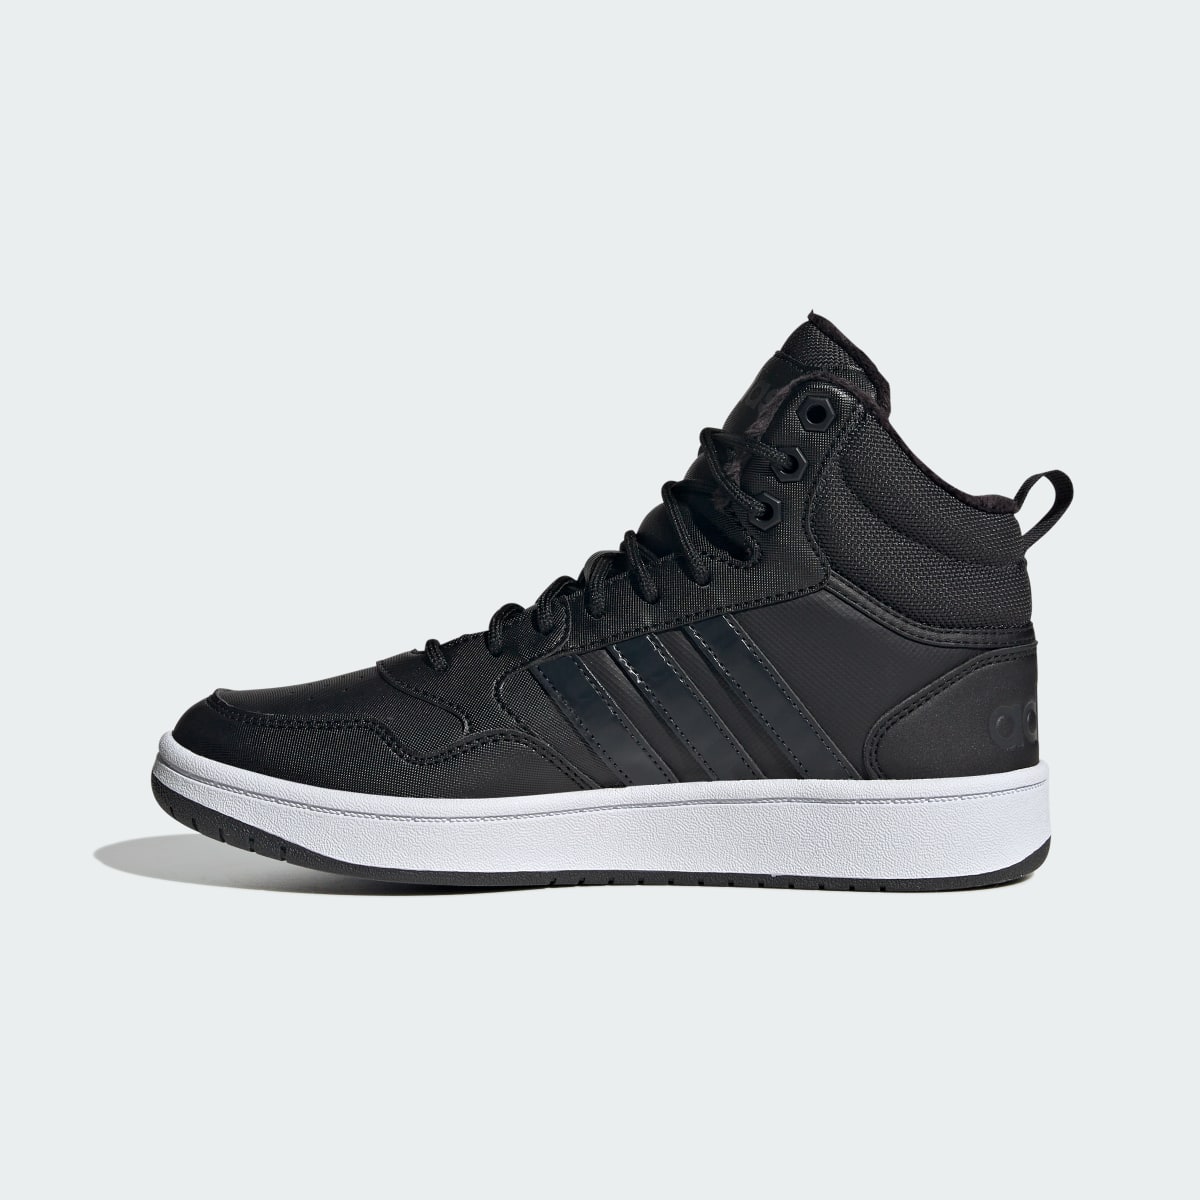 Adidas Hoops 3.0 Mid Lifestyle Basketball Classic Fur Lining Winterized Shoes. 7